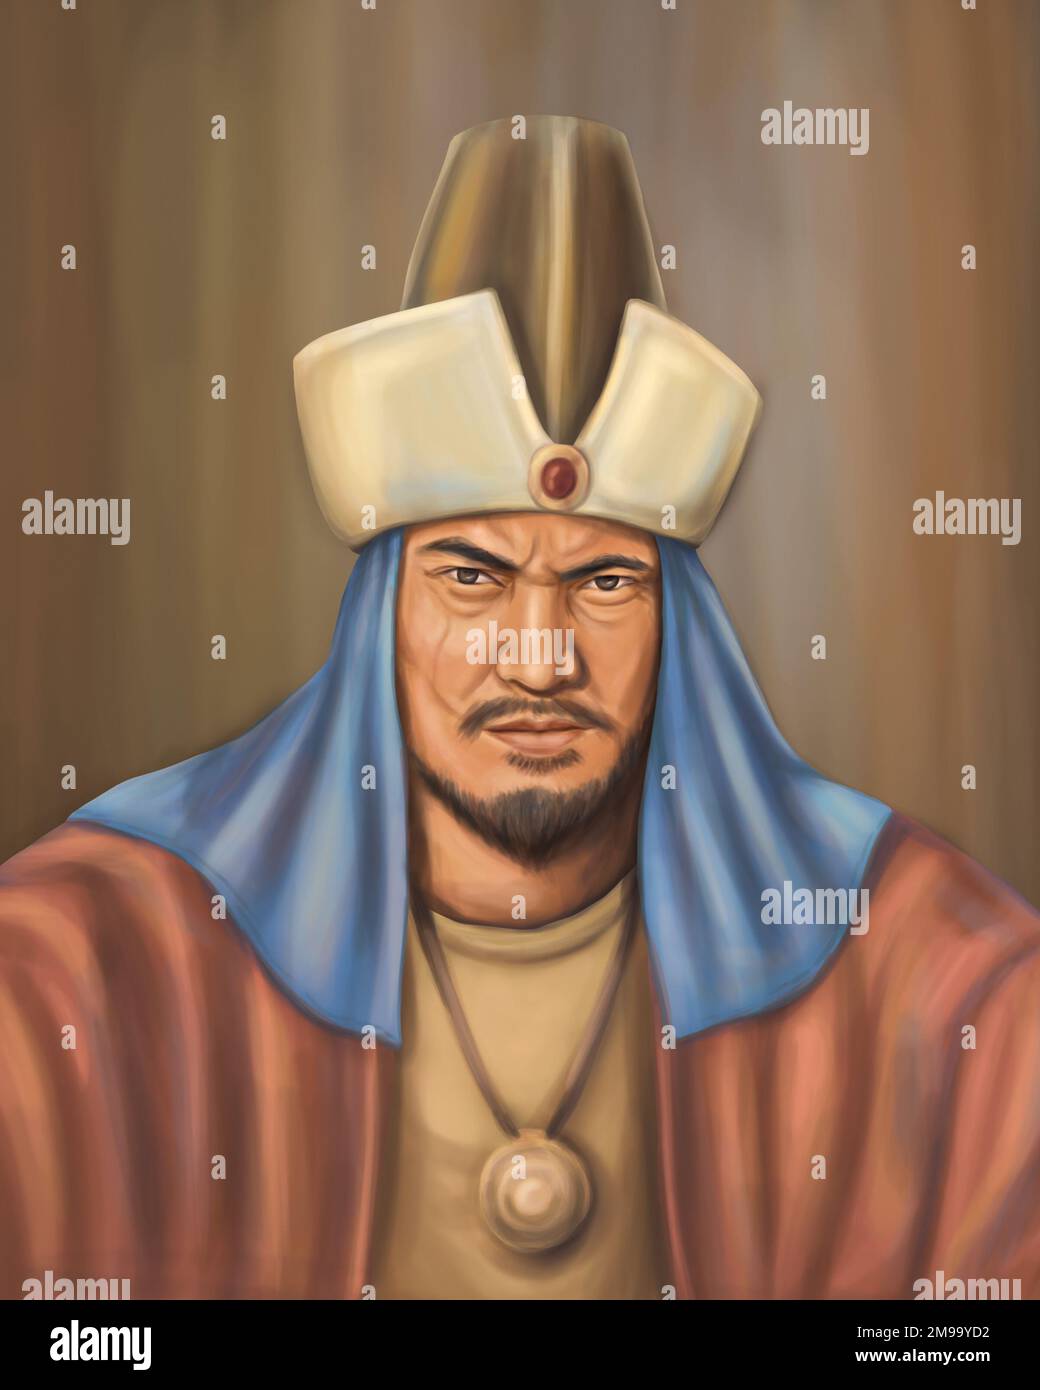 Sultan, ruler of Islamic states, sultanate. Stock Photo